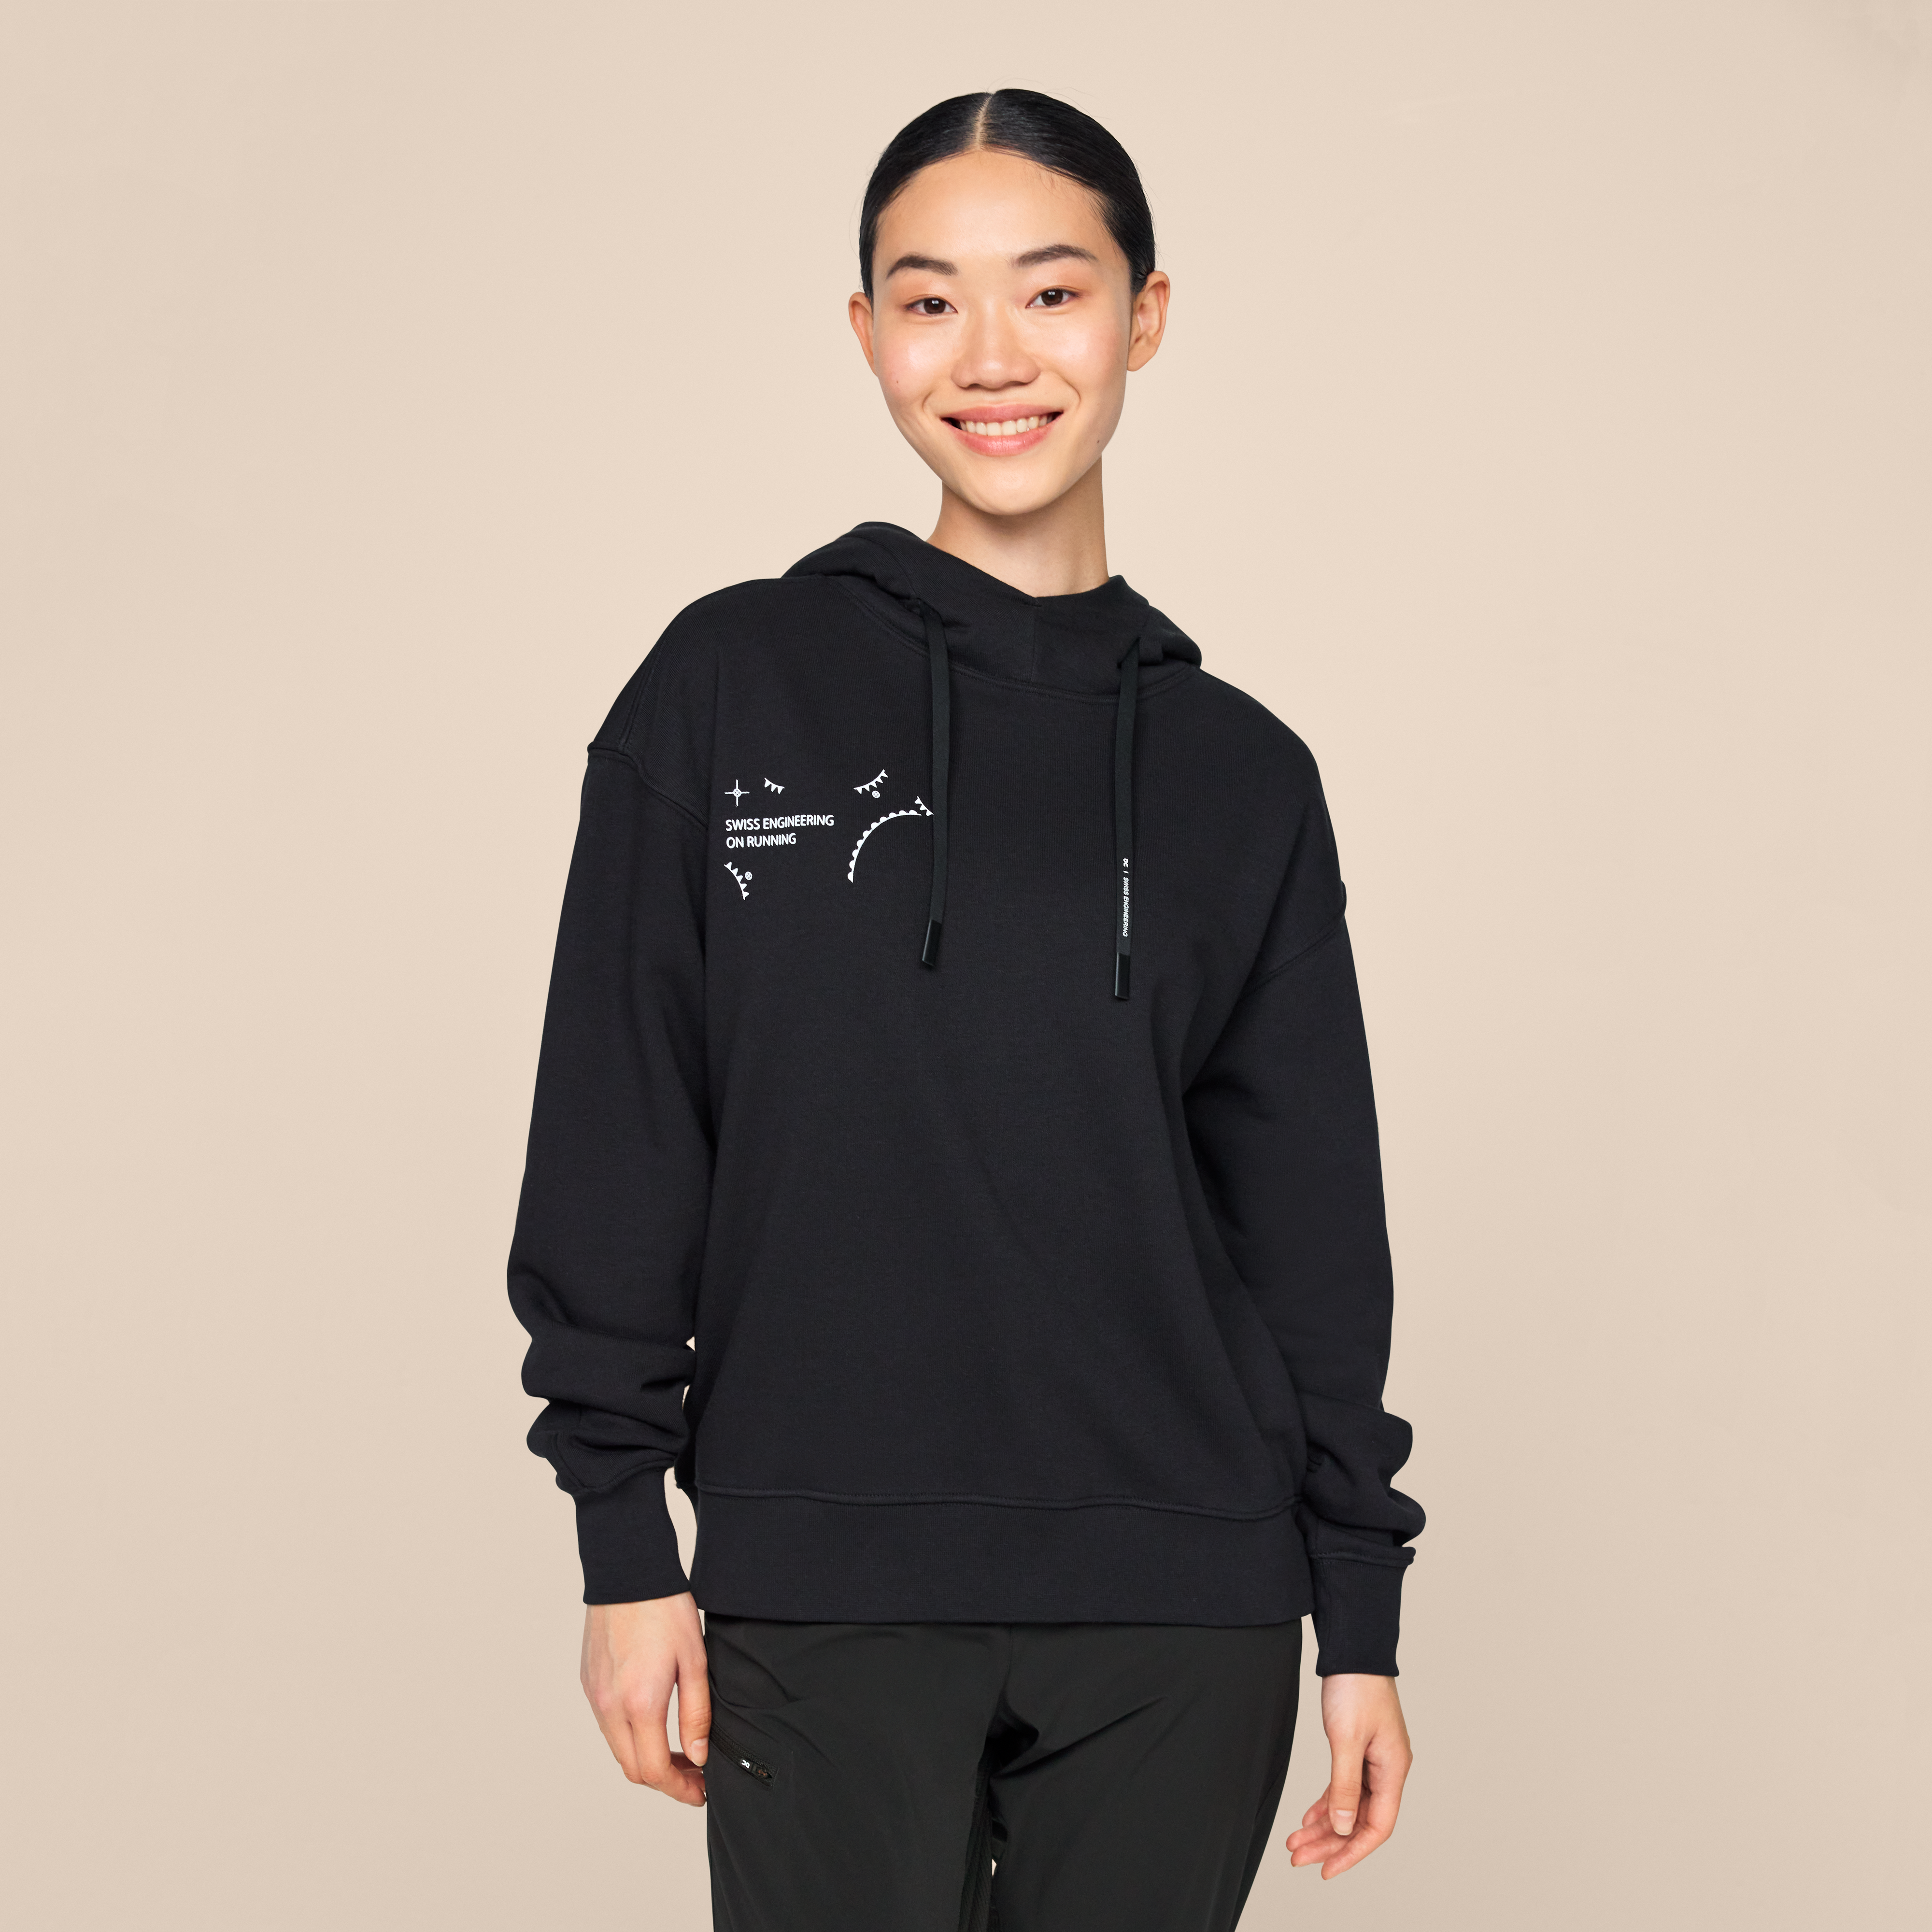 On Graphic Club Hoodie Black Women Cold weather, recovery, travel Hoodies and sweatshirts